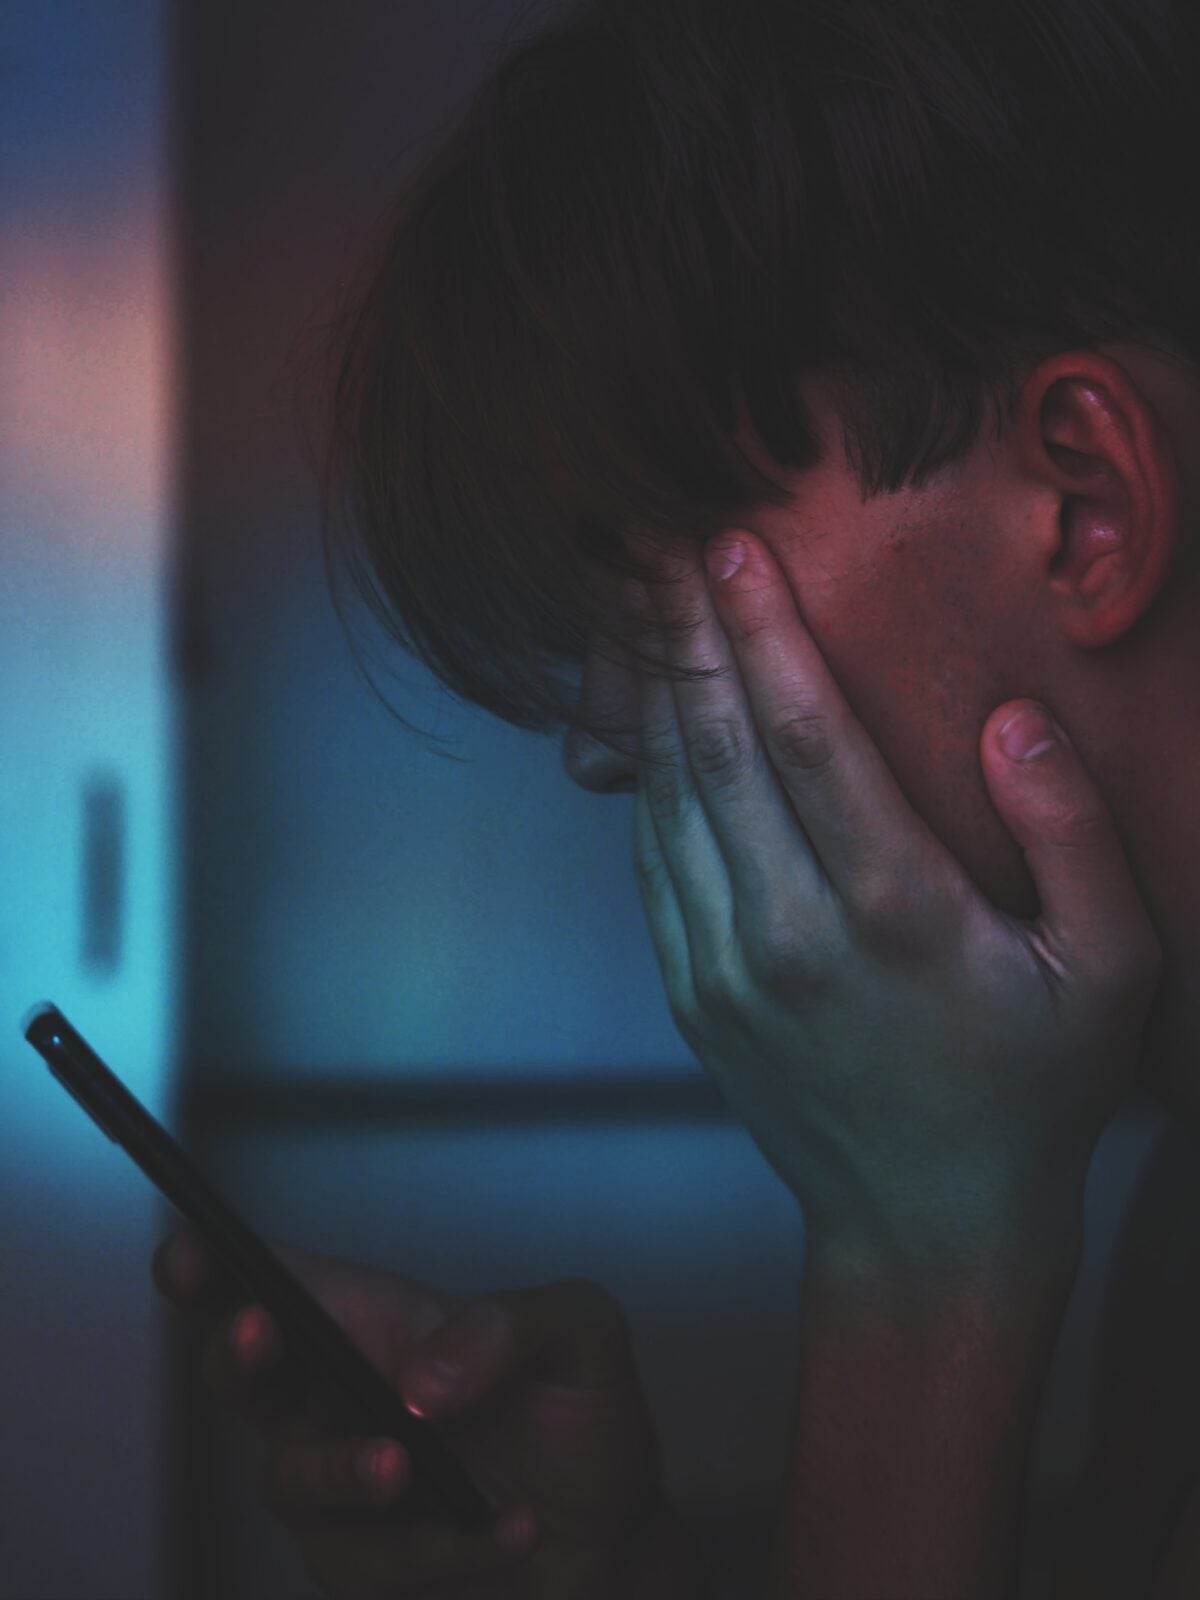 A man with one hand covering a side of his face while he uses his phone in a dark room.